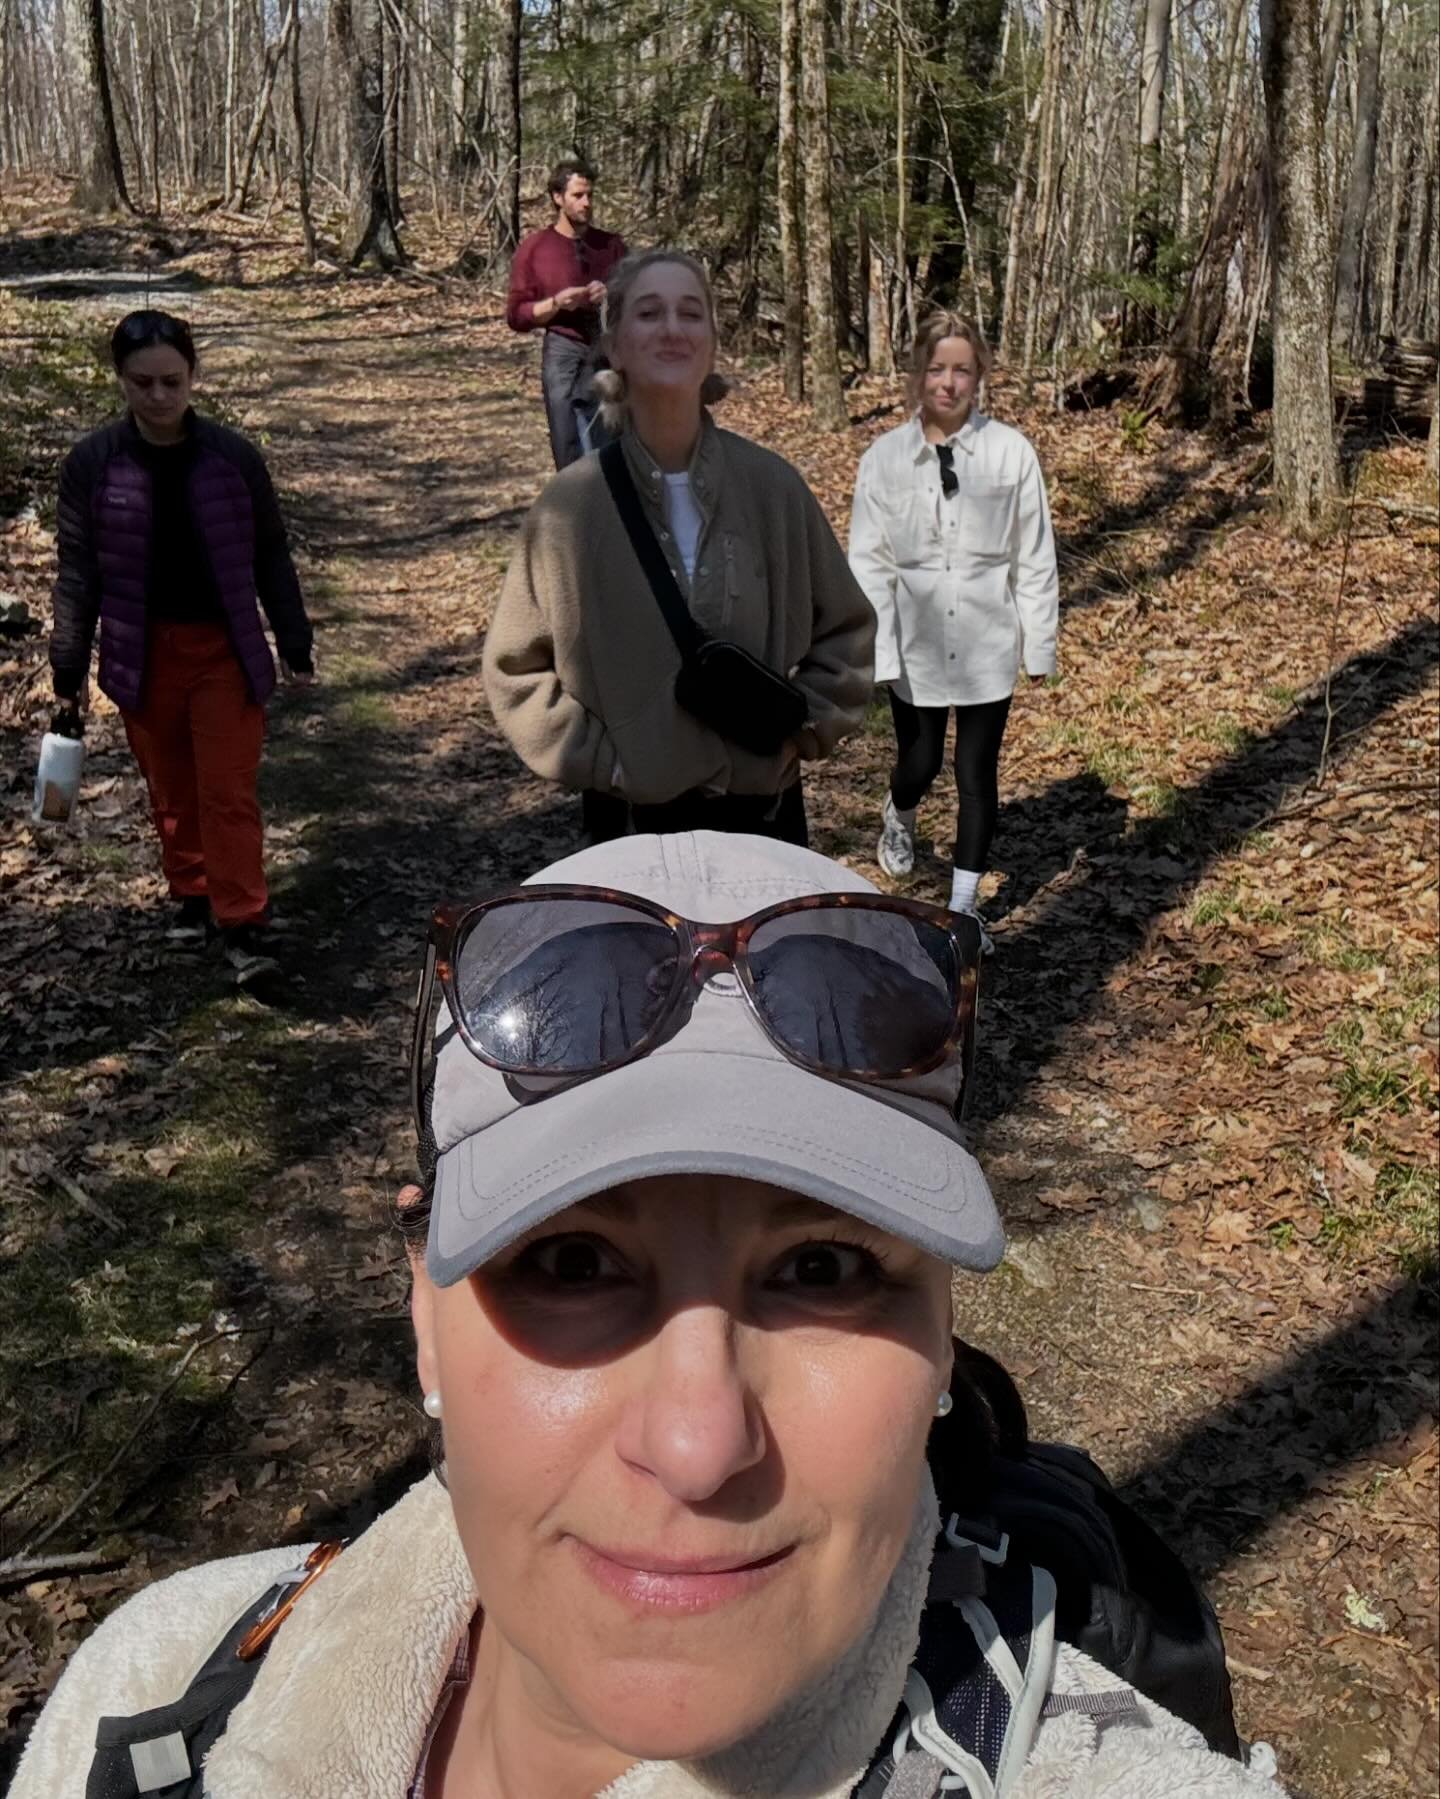 We hit the trails at Kennedy Park in Lenox on a glorious Spring Sunday morning with a group participating in an artists-residency program at @lifehousehotels Berkshires. They are using the Berkshires as their muse to inspire their art for 5 days. Our